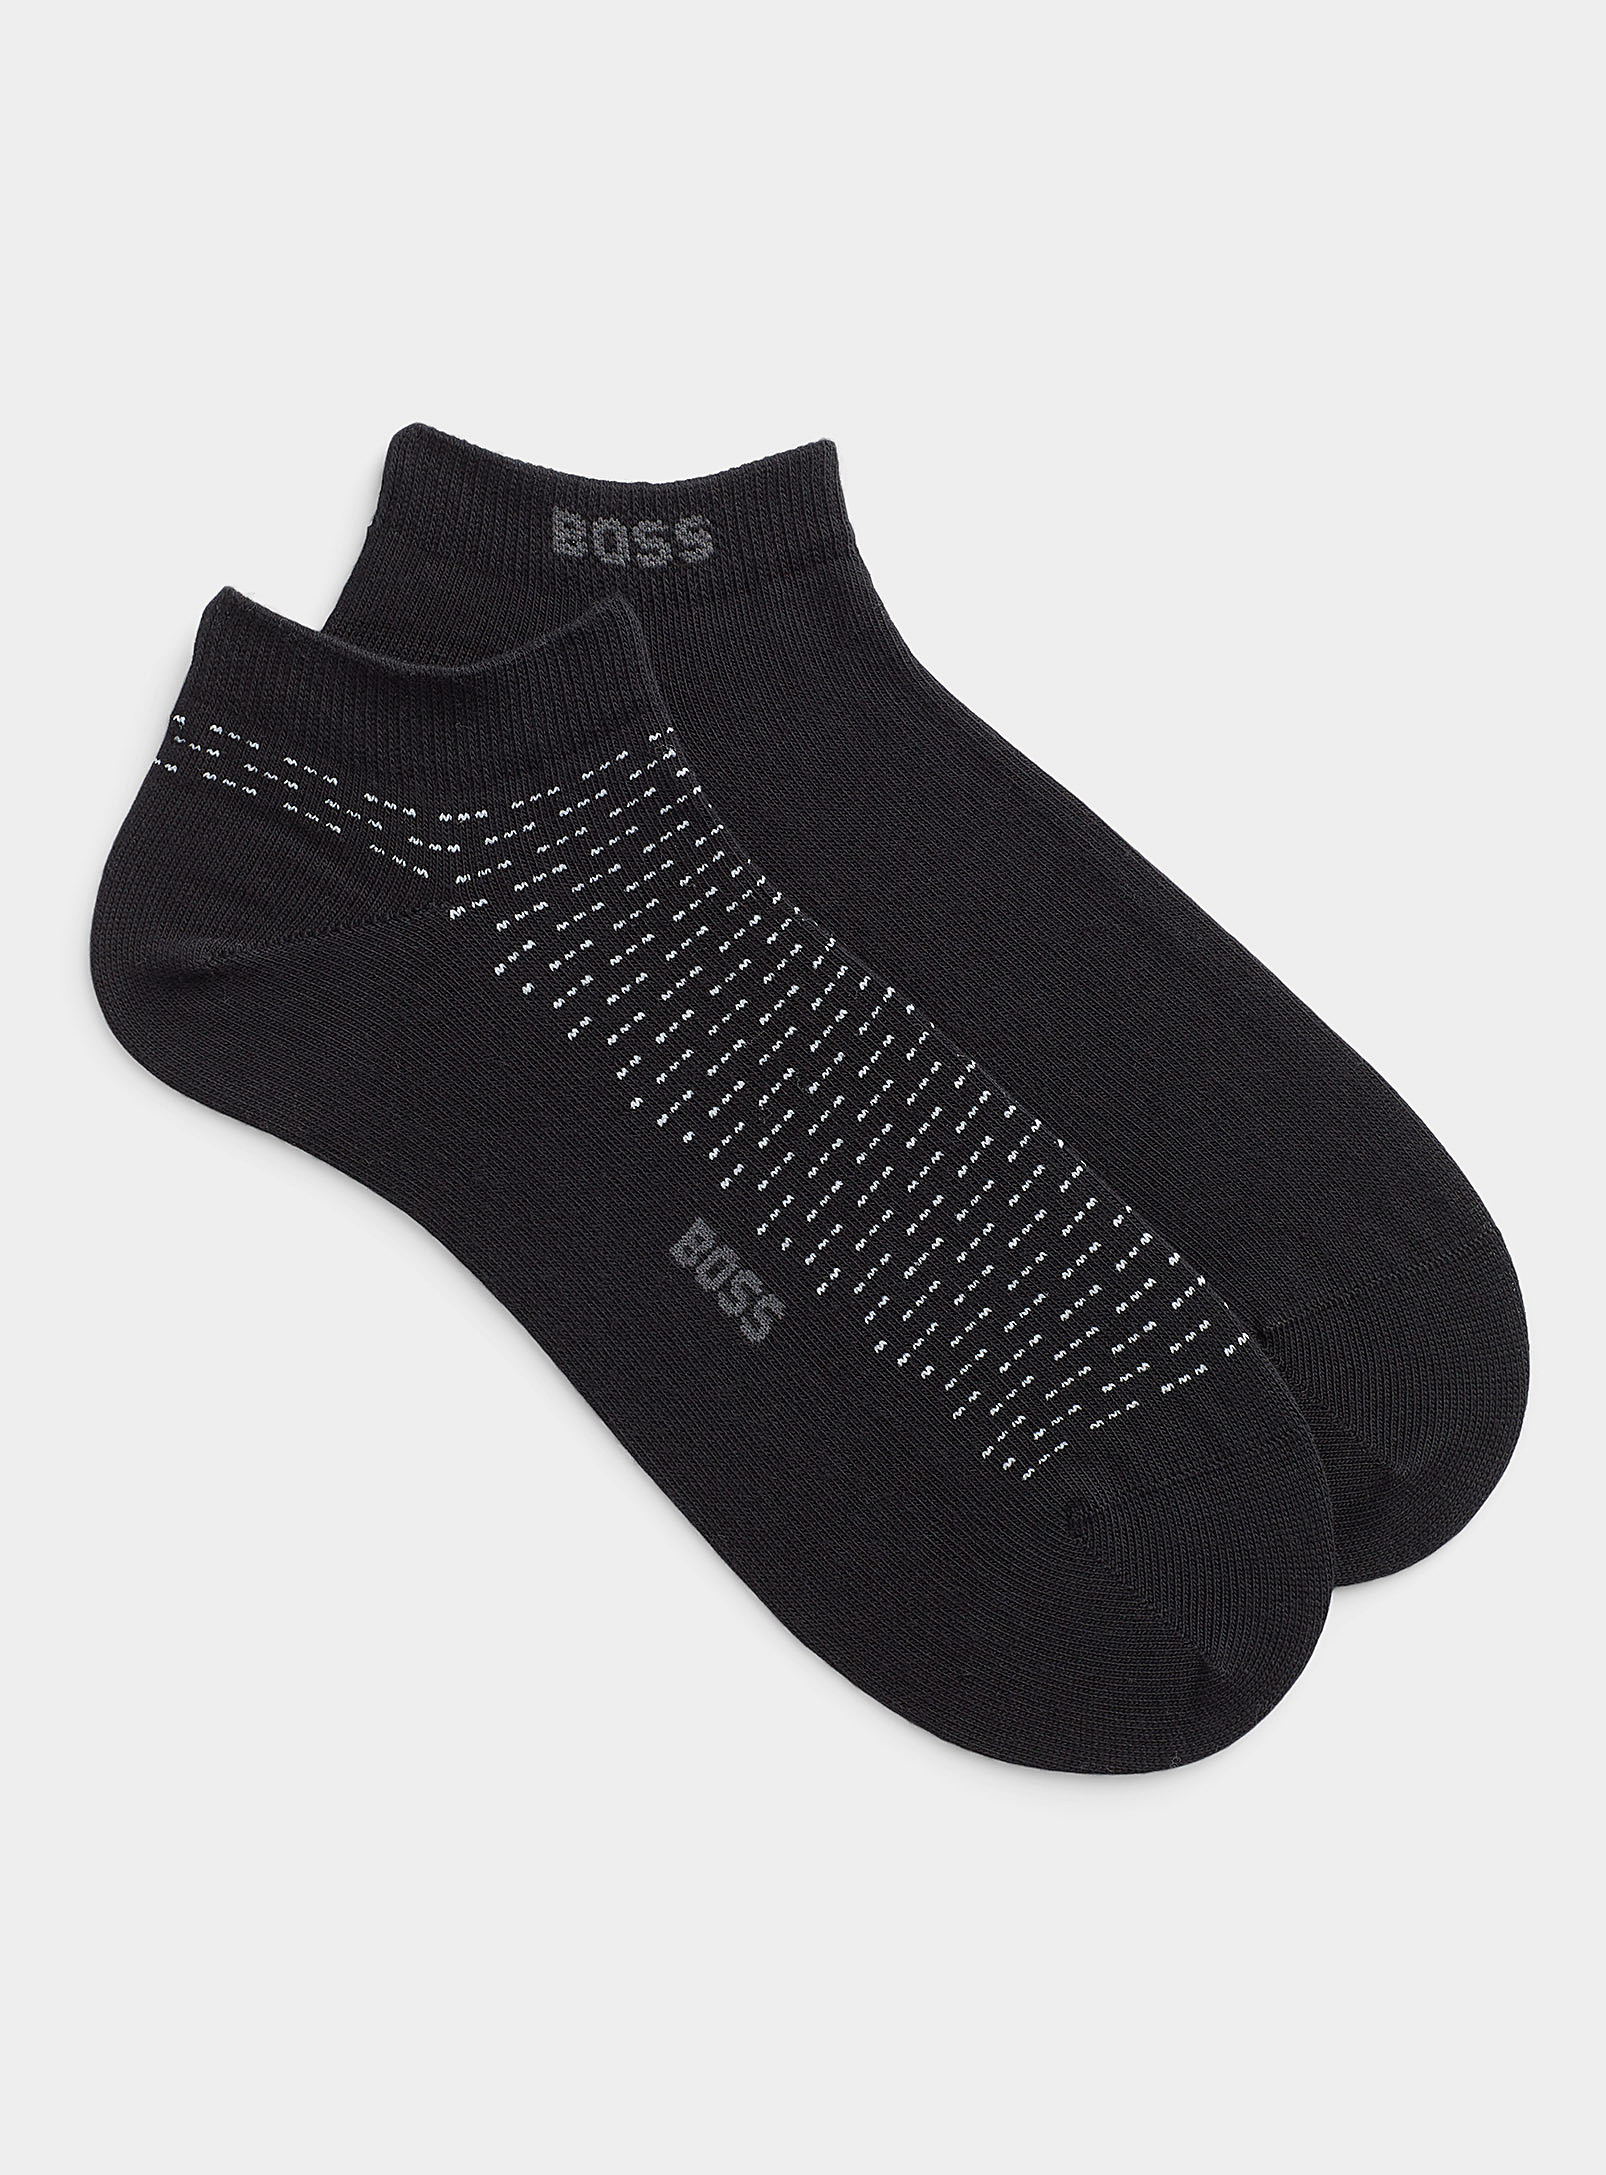 Hugo Boss Solid And Mini-pattern Ped Socks 2-pack In Black